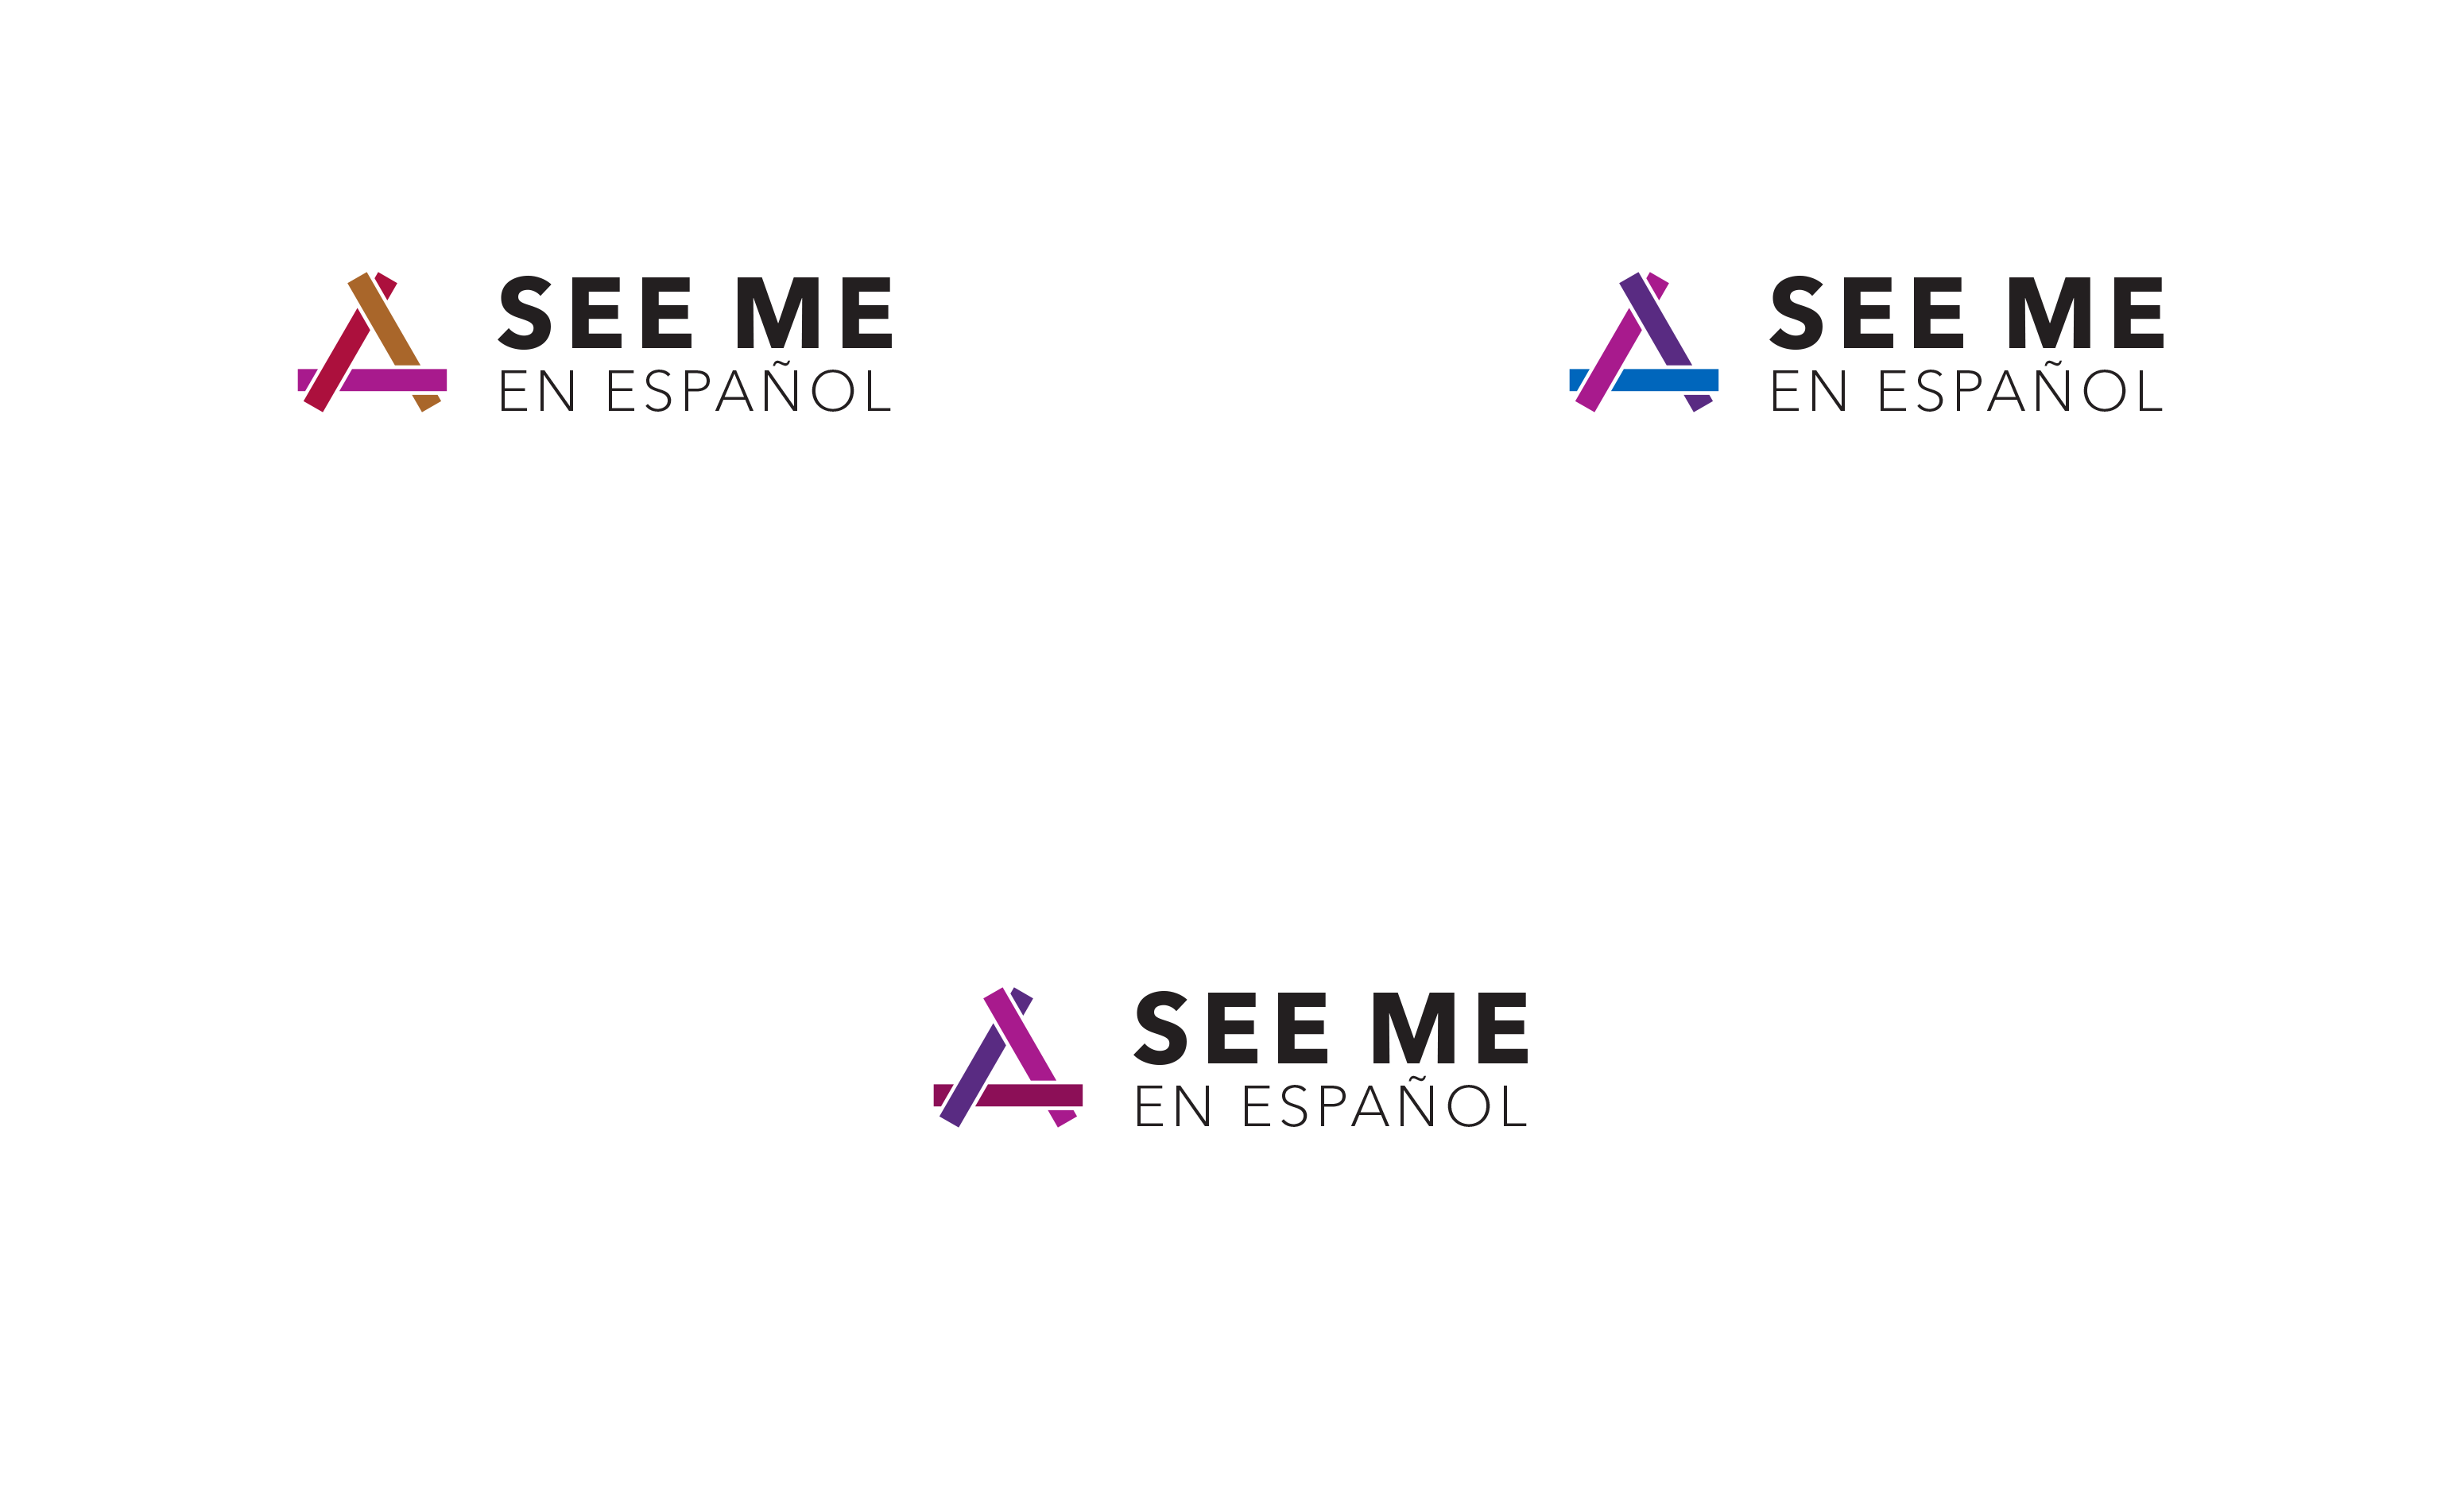 A page showing the Smithsonian Access Logo Family: "See Me at the Smithsonian" in Spanish